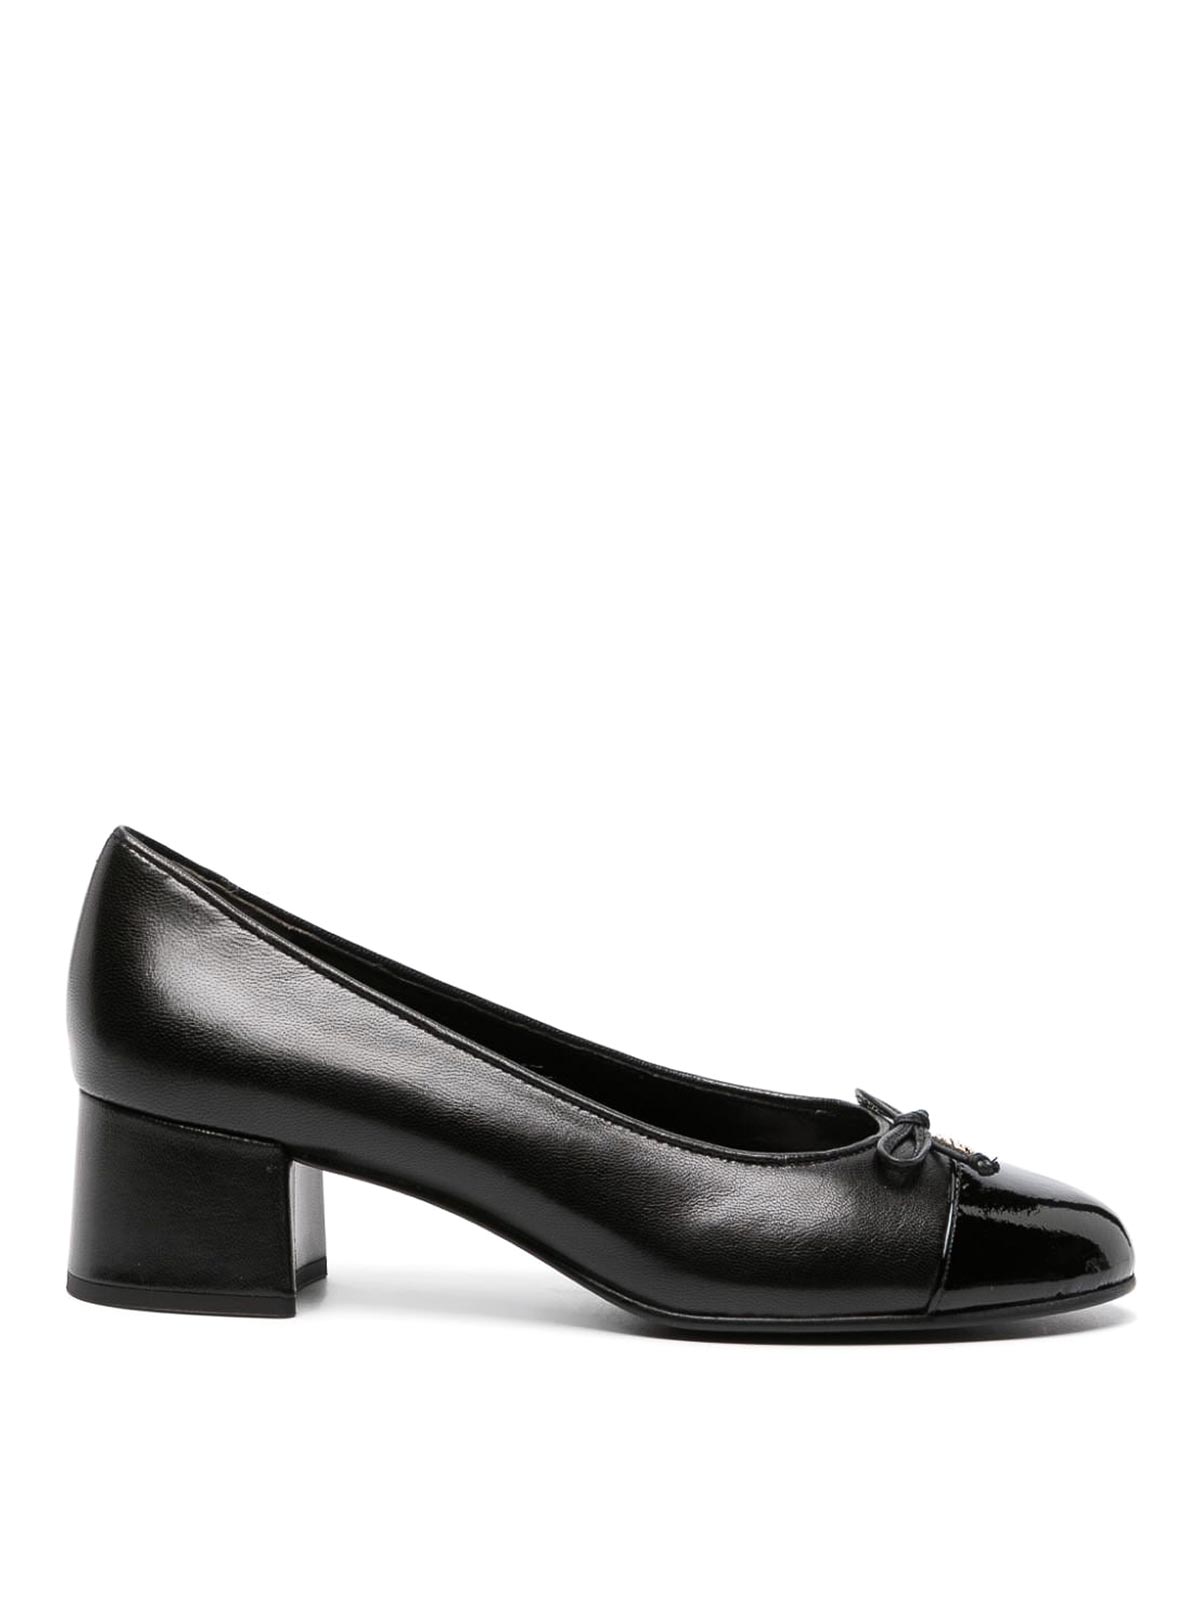 Tory Burch Bow Leather Pumps In Black